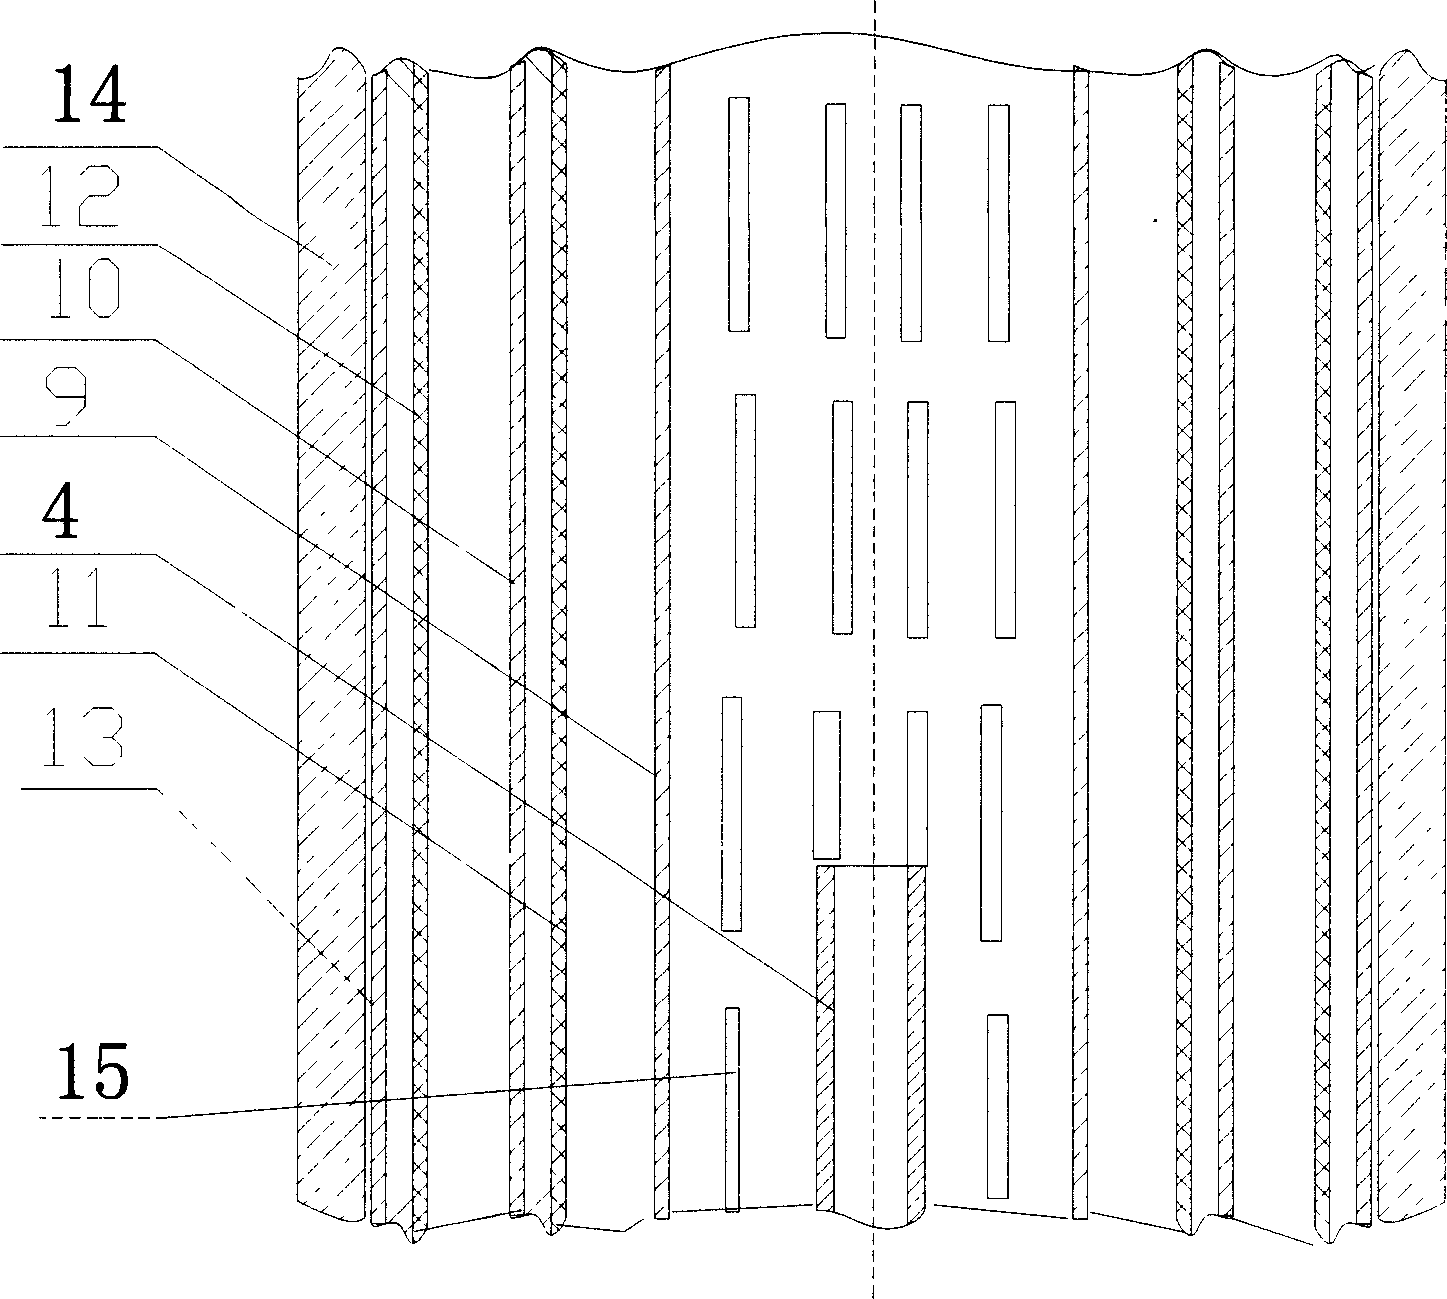 Process and apparatus for separating gas and liquid